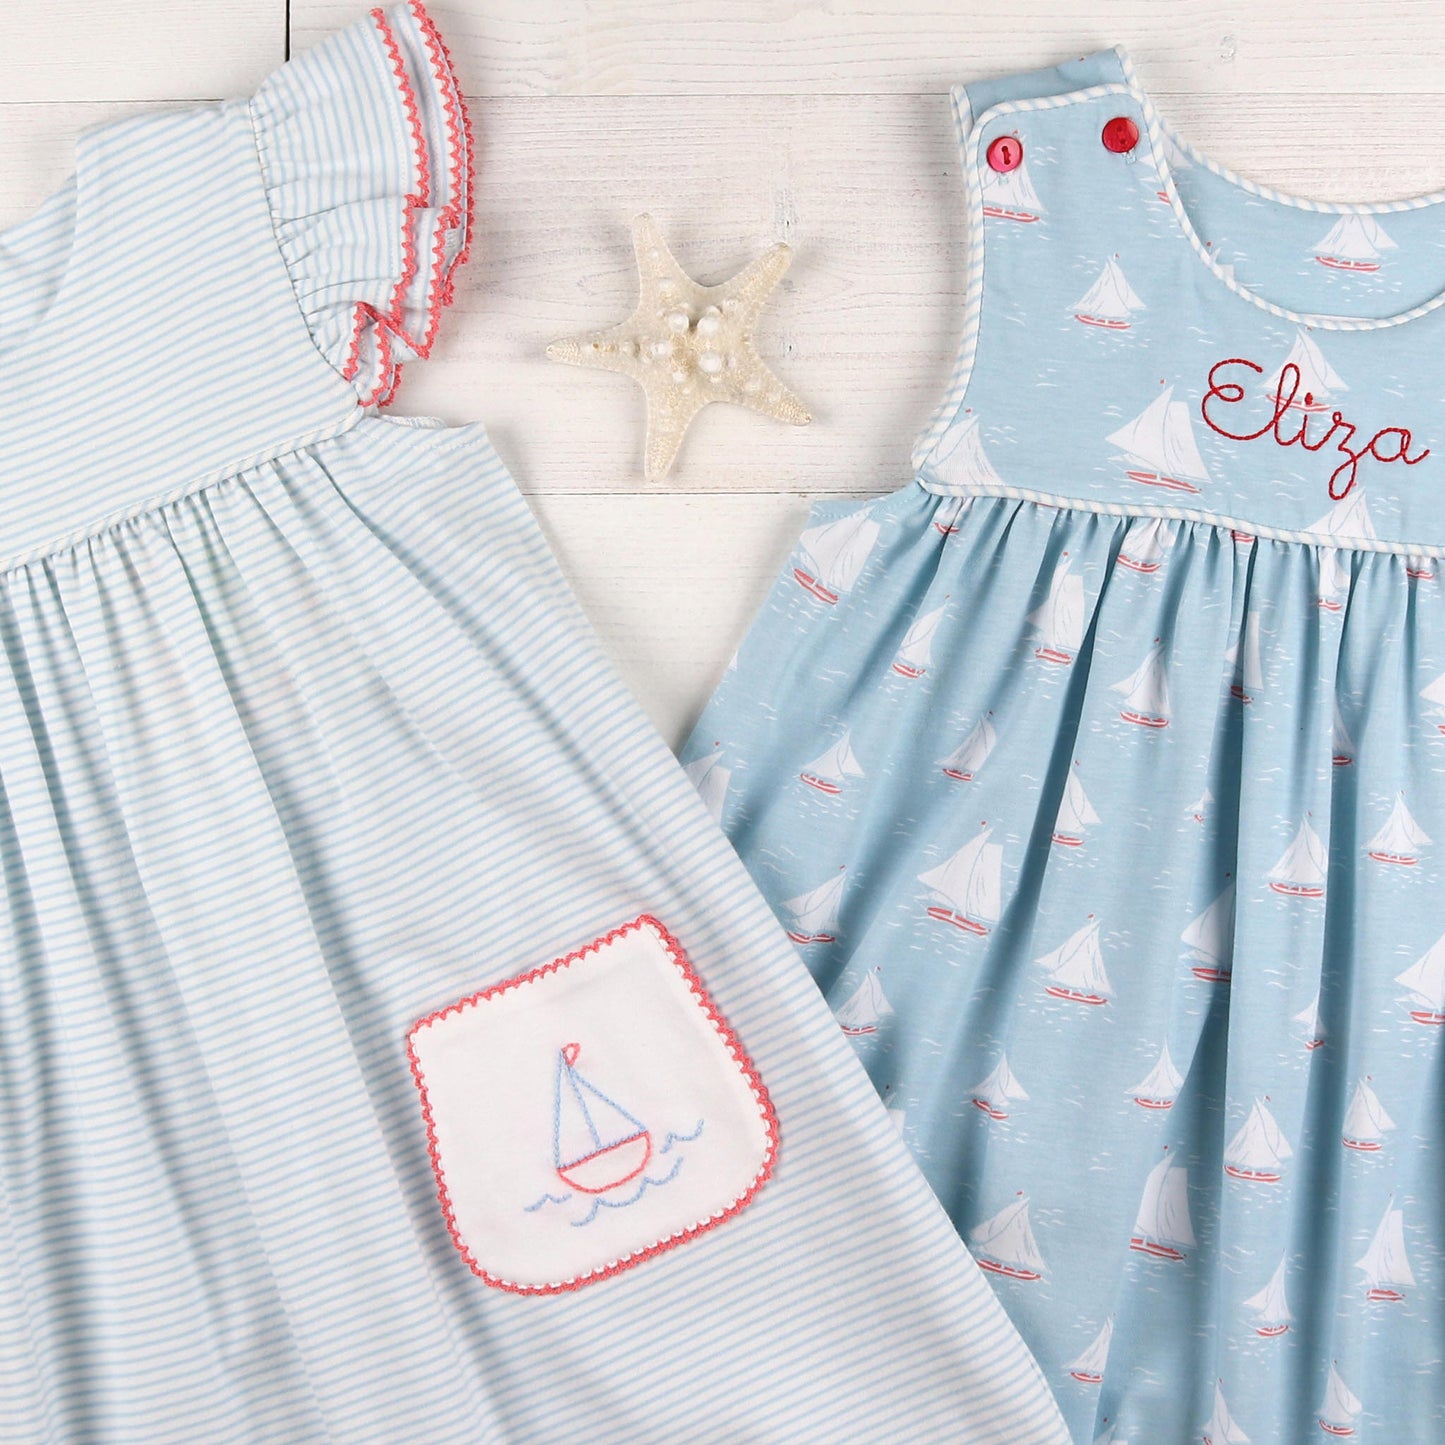 flatlay of two dresses and a starfish shell